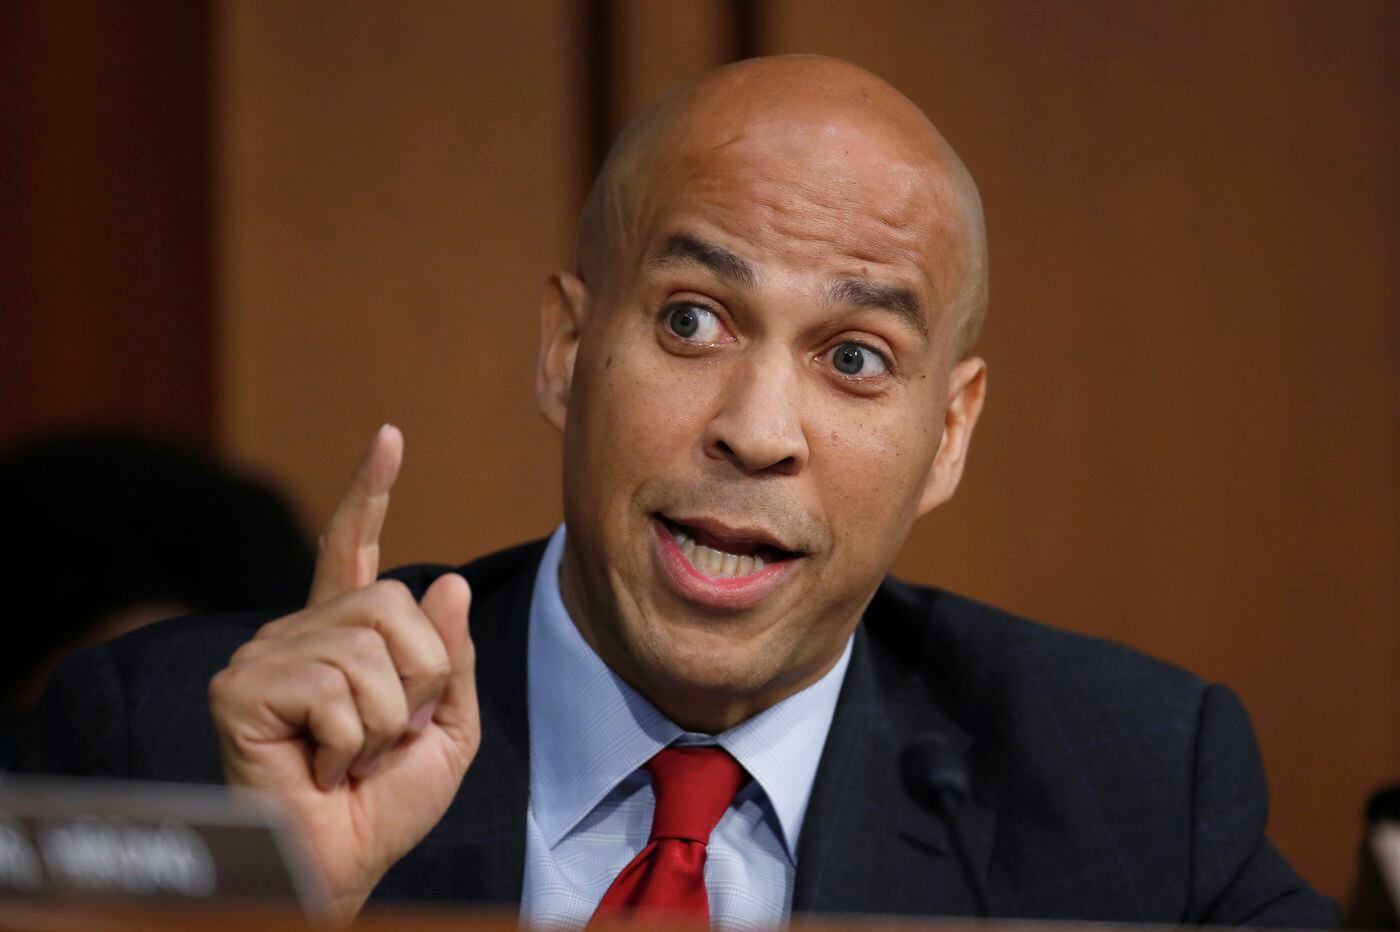 N.J. Sen. Cory Booker launches 2020 campaign for president